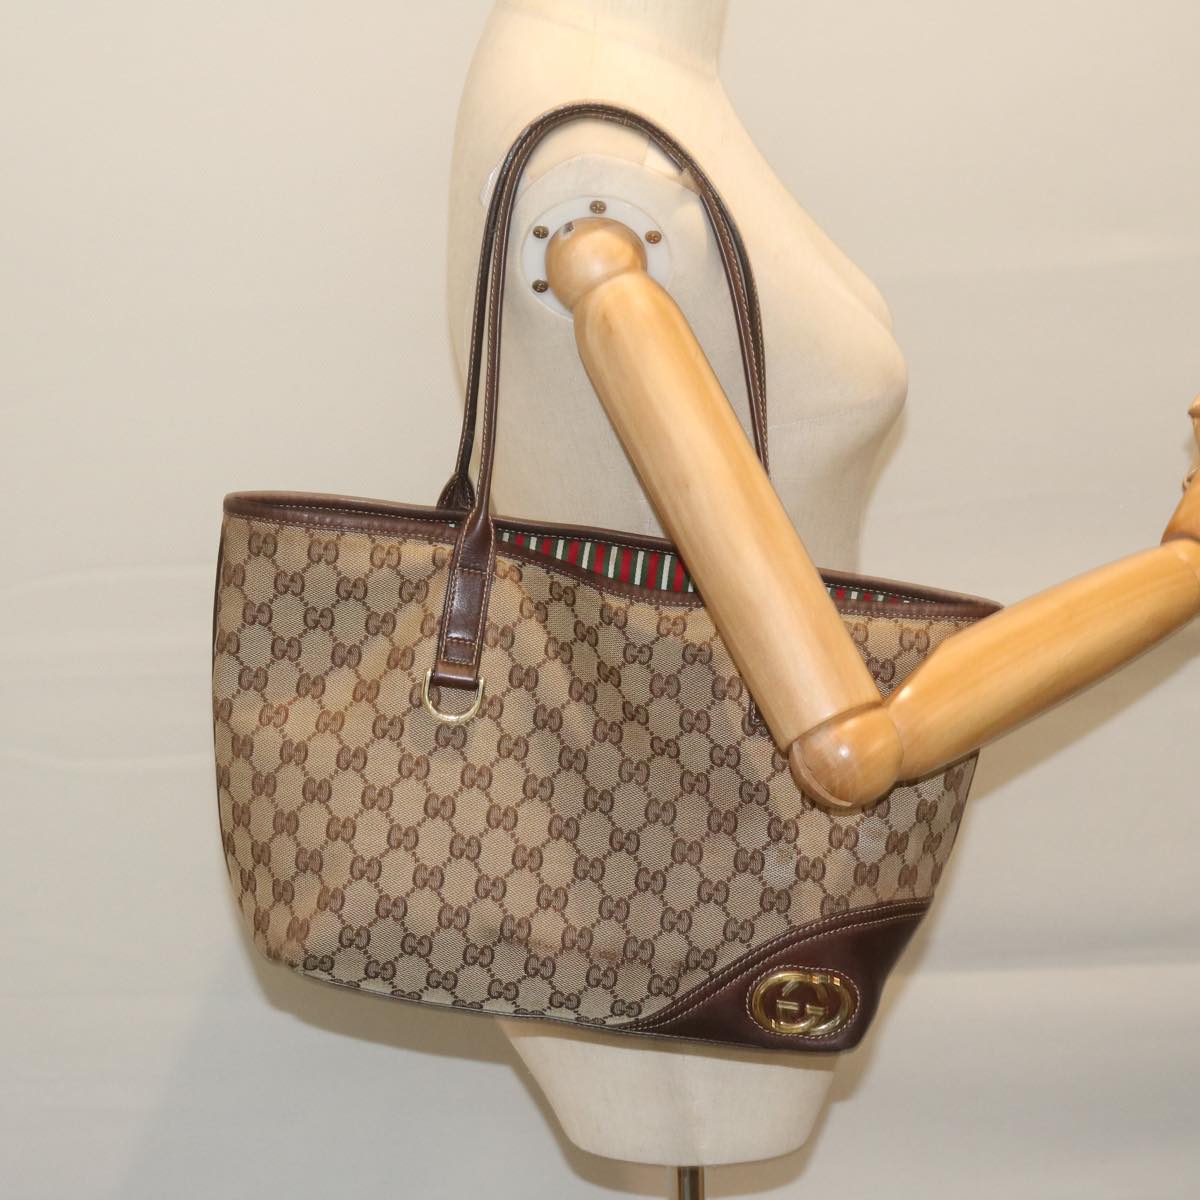 GUCCI GG Canvas Tote Bag Beige 169946 Auth bs11421